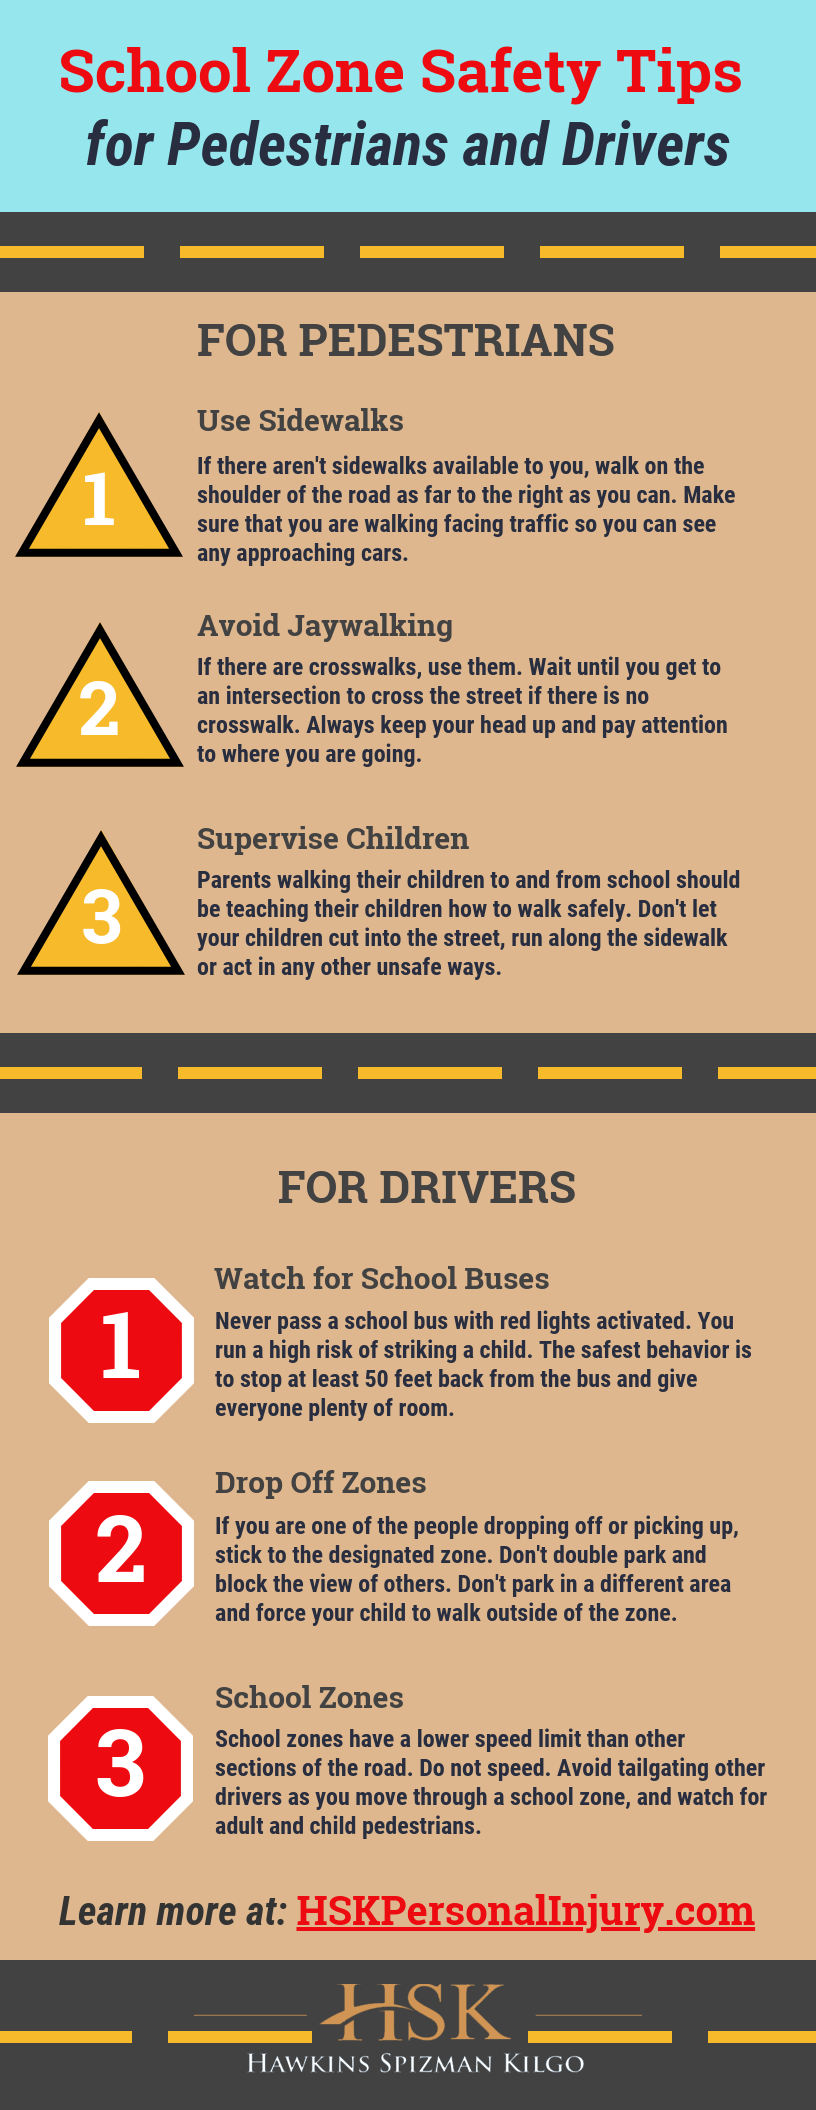 School Zone Safety Tips for Pedestrians and Drivers infographic